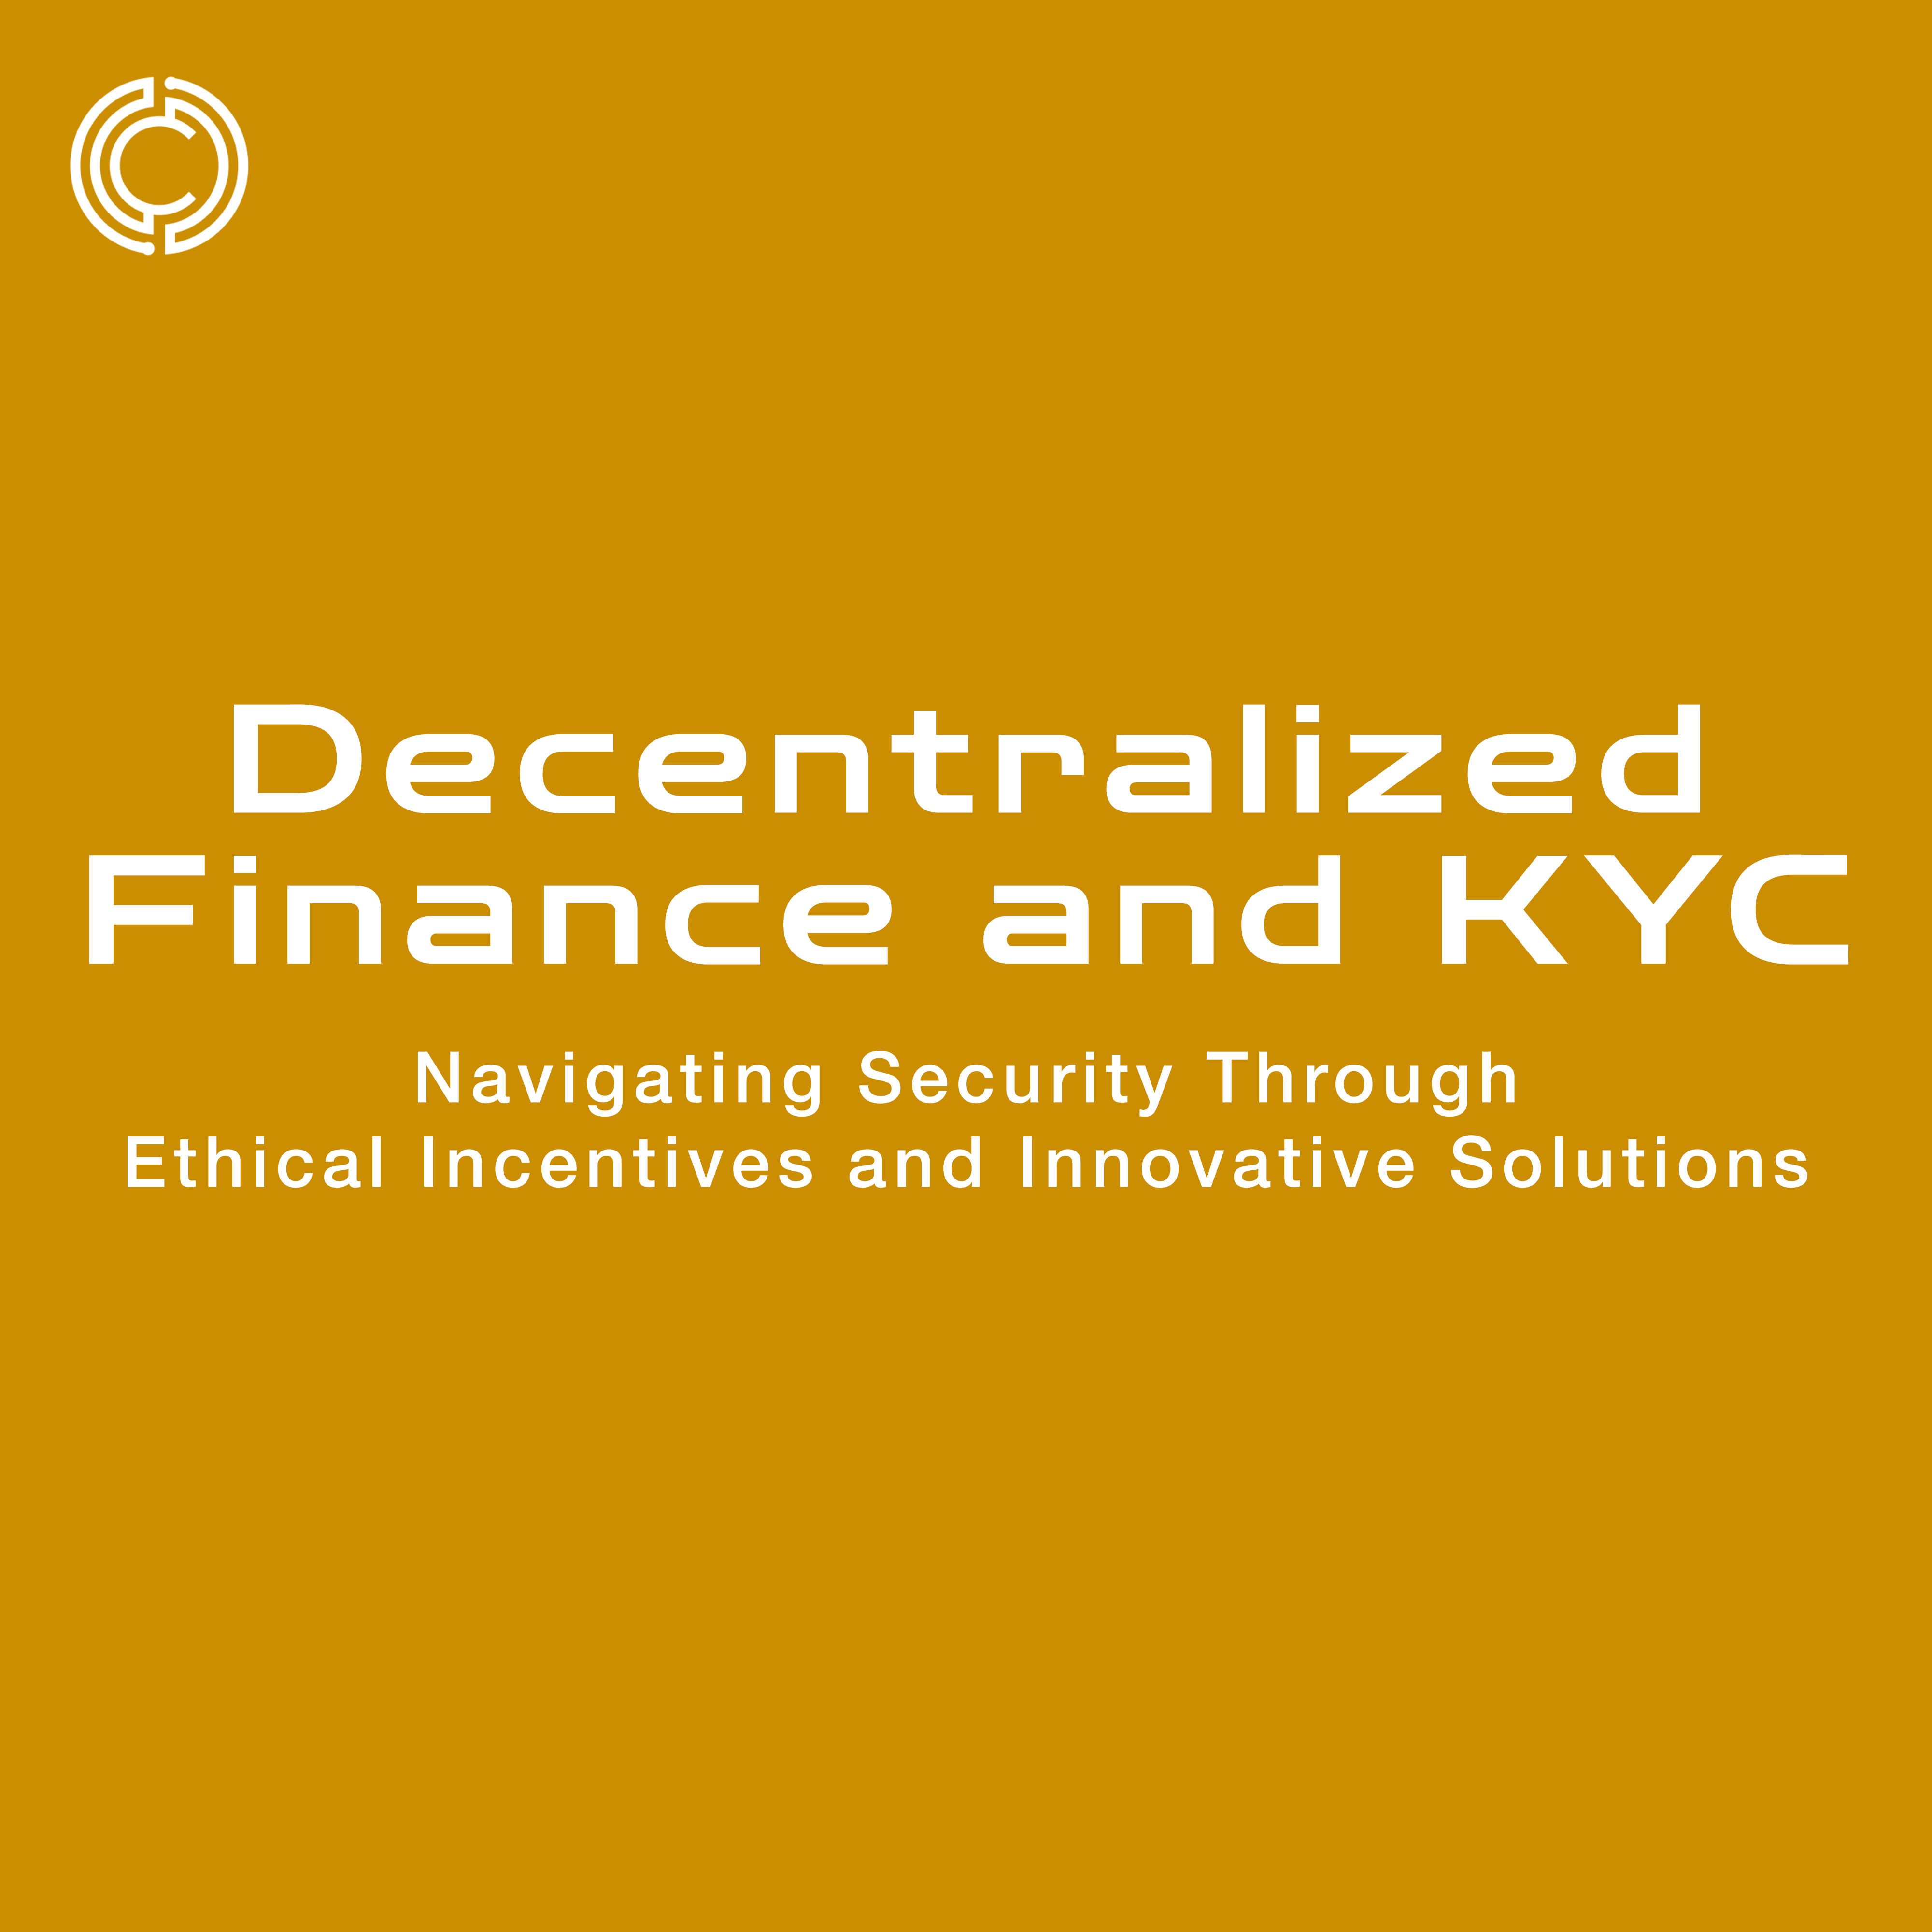 Decentralized Finance and KYC: Navigating Security Through Ethical Incentives and Innovative Solutions